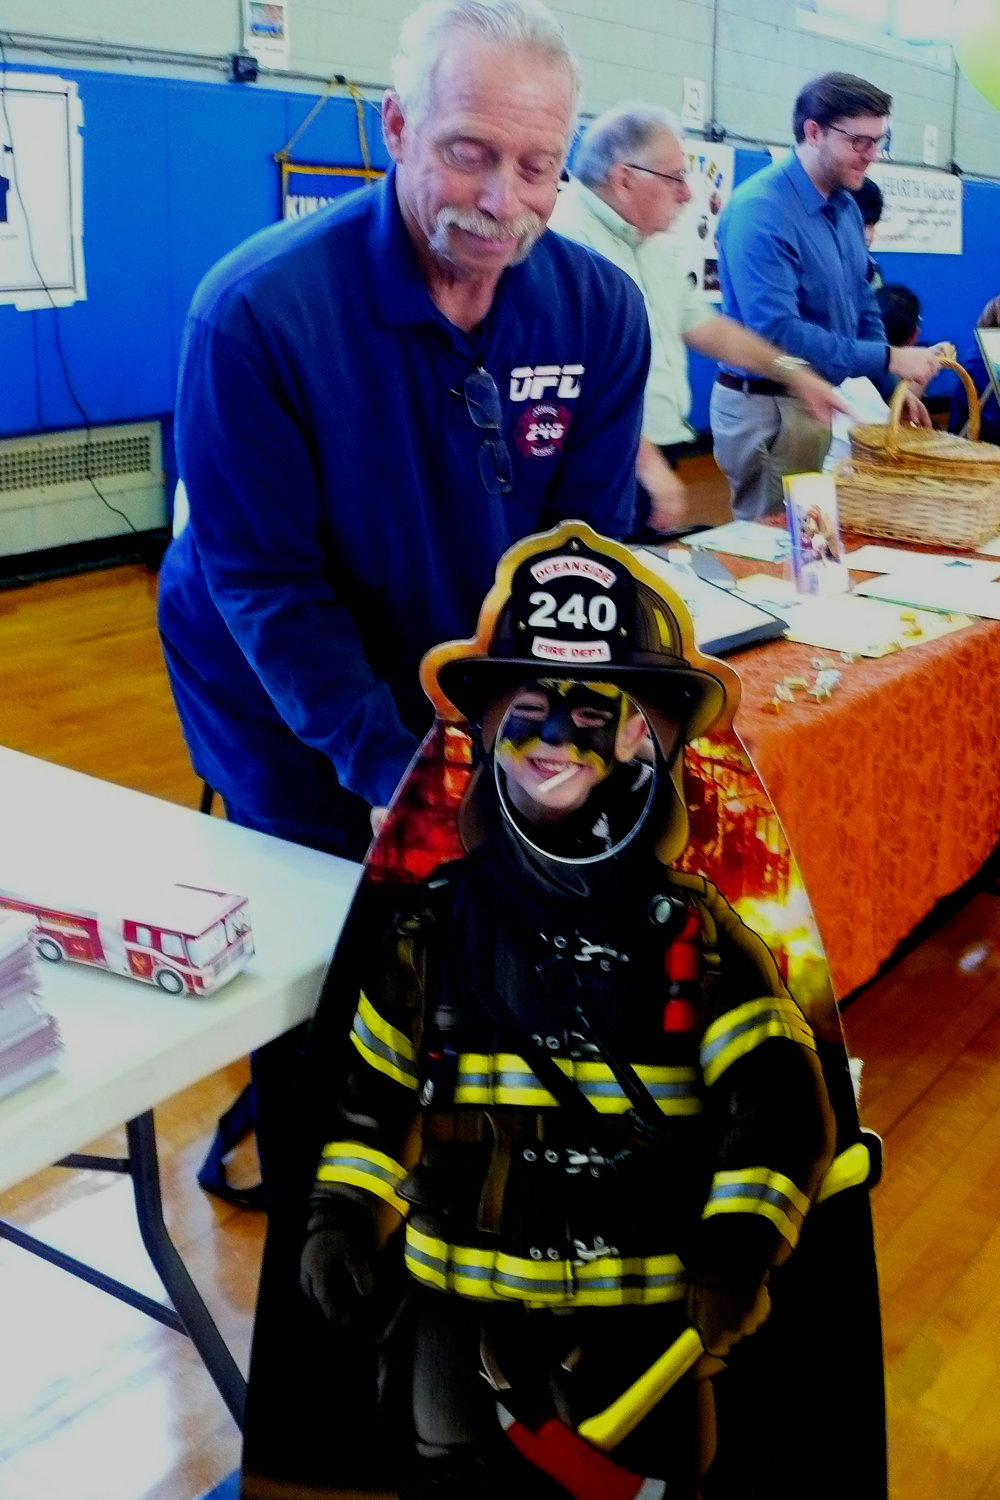 The Oceanside Chamber of Commerce hosted Fam Fest on Oct. 5. Young resident Jose Daniti had some fun while learning about the Fire Department.